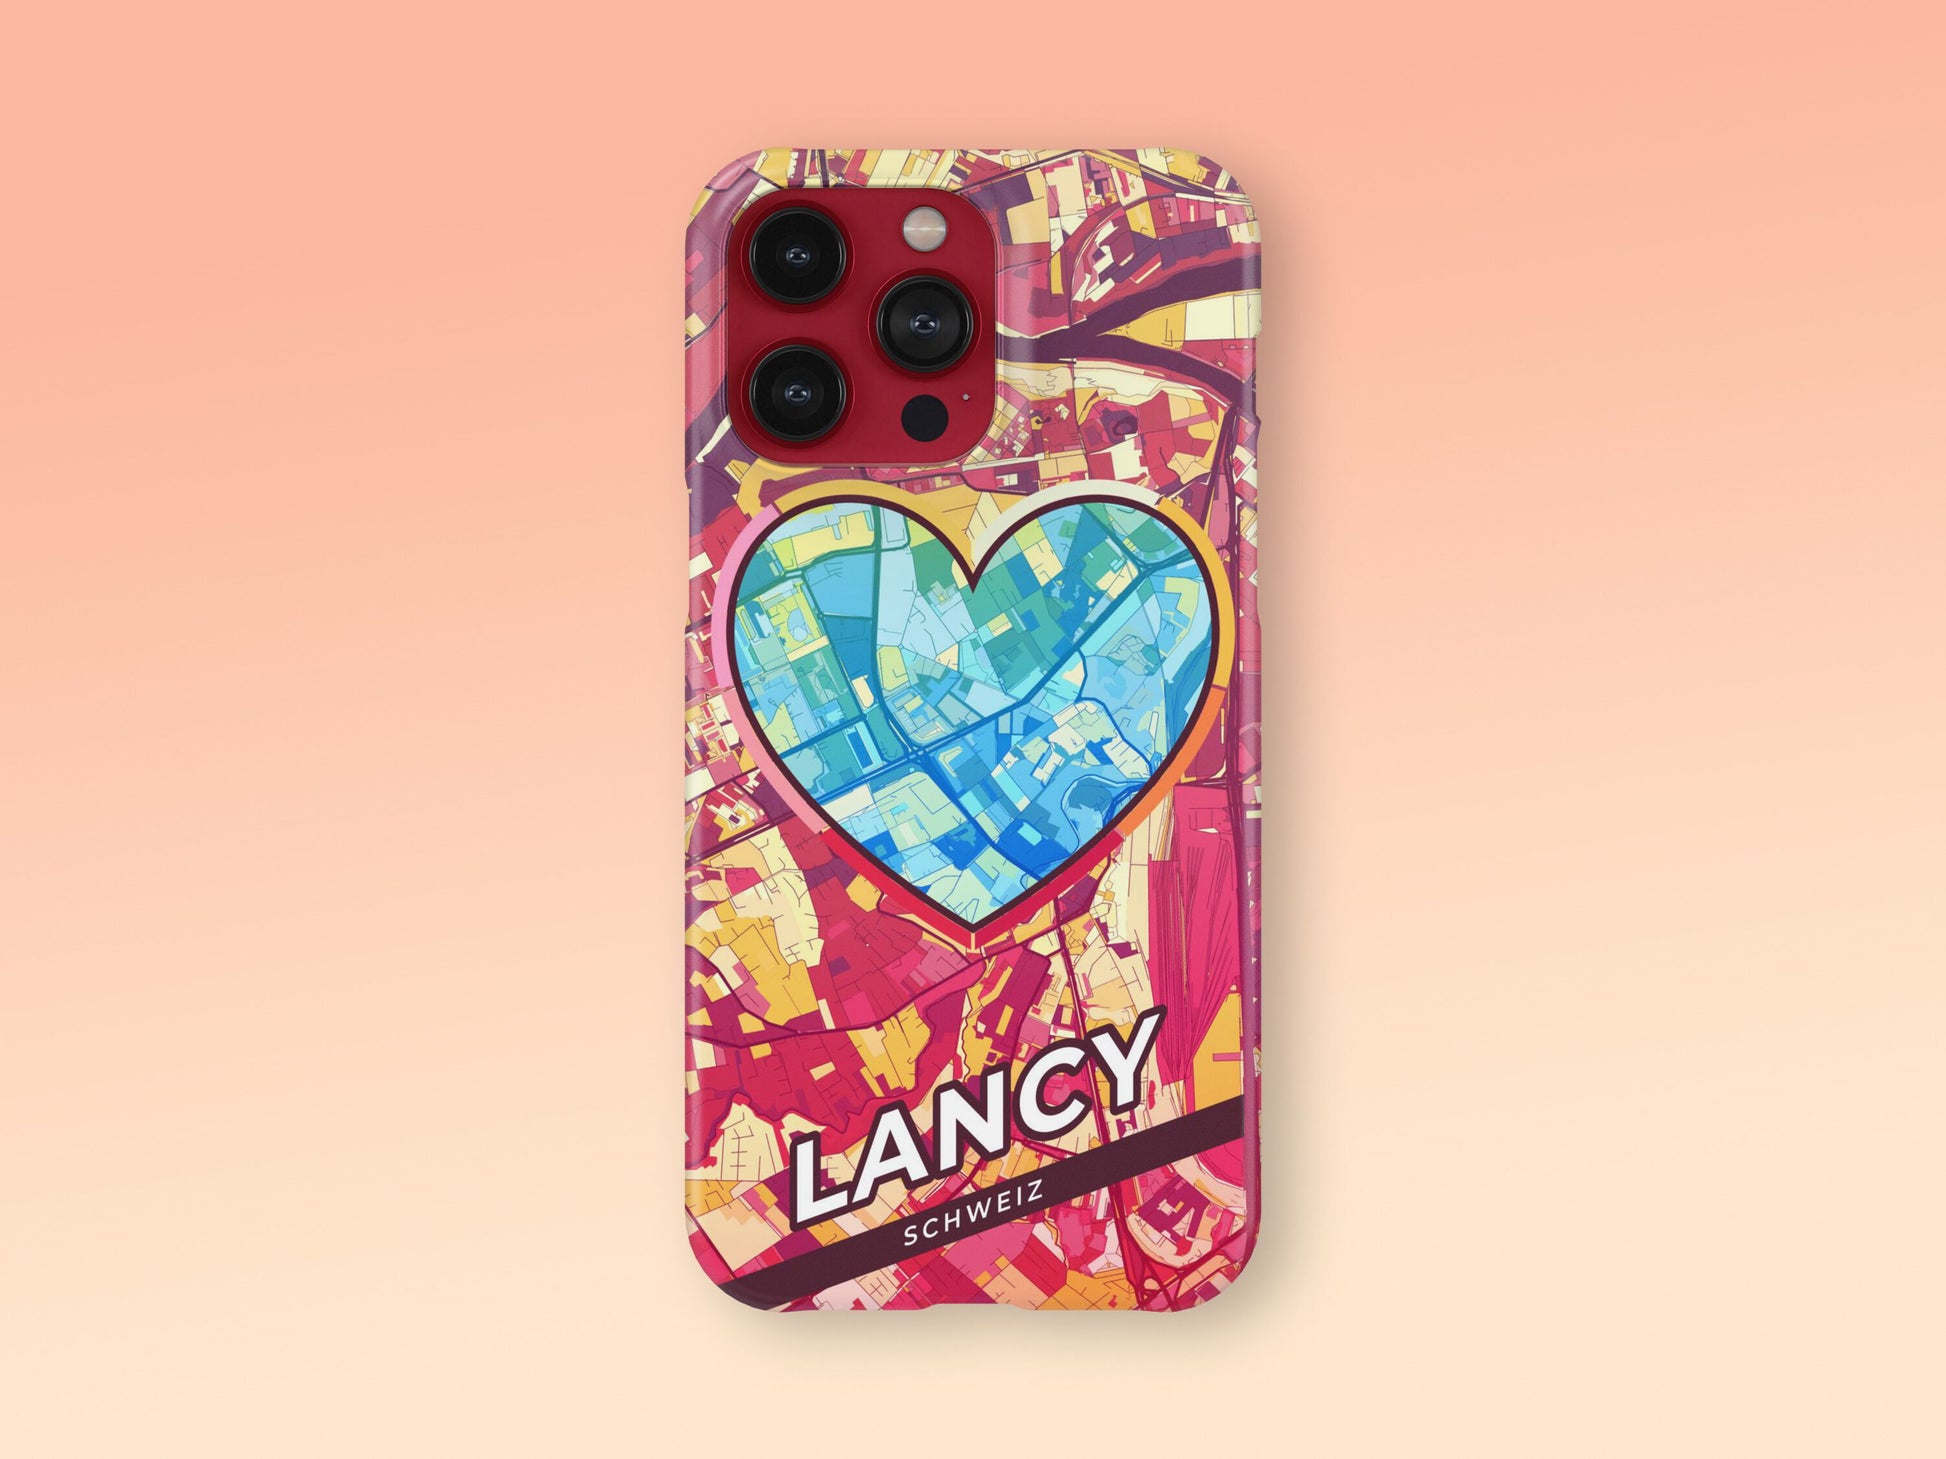 Lancy Switzerland slim phone case with colorful icon. Birthday, wedding or housewarming gift. Couple match cases. 2